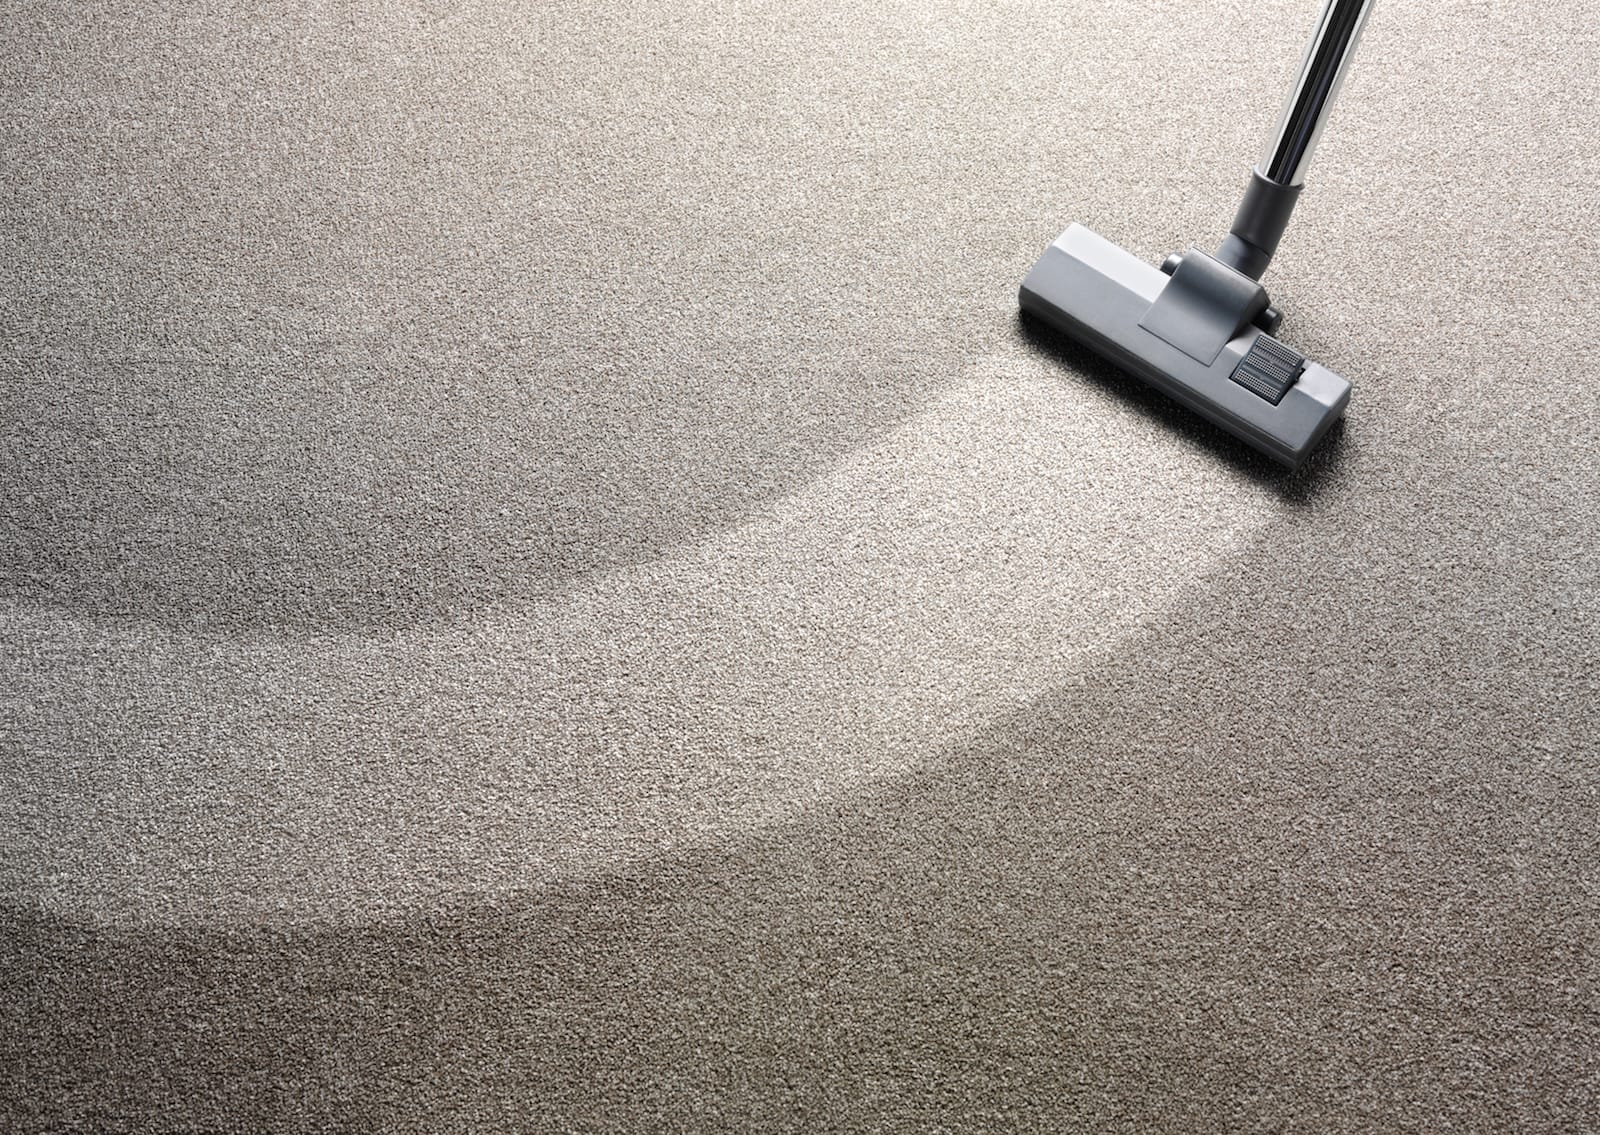 Which is Better, Dry Or Wet Carpet Cleaning?